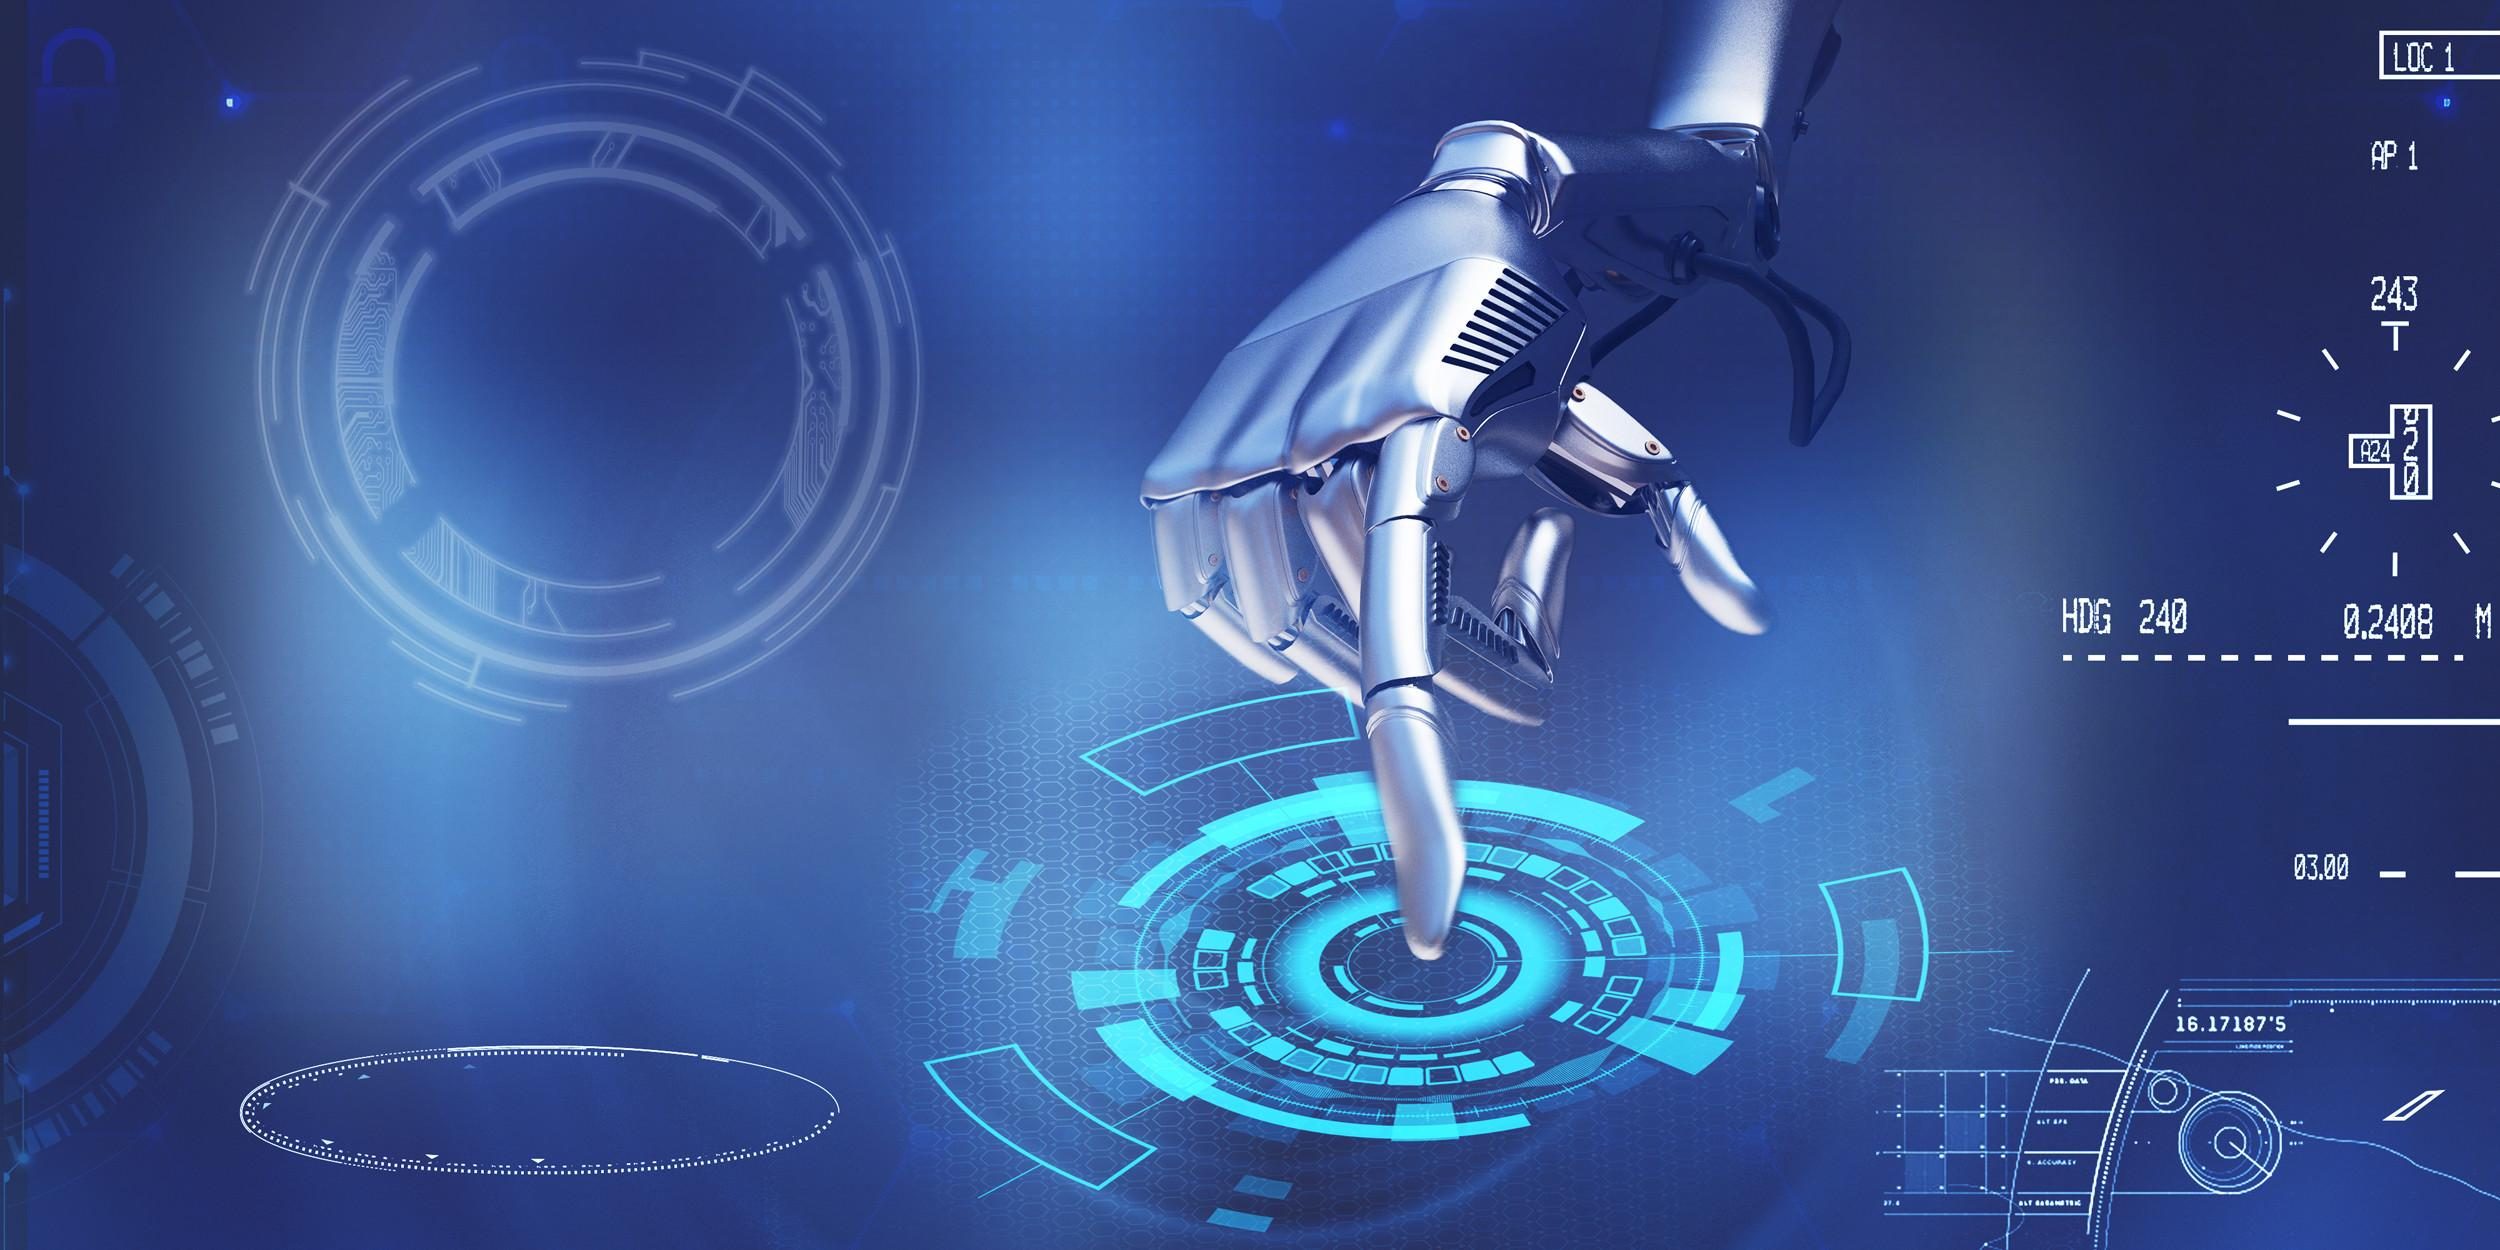 China’s Agile Robots nets $130m from Sequoia, GL Ventures, others